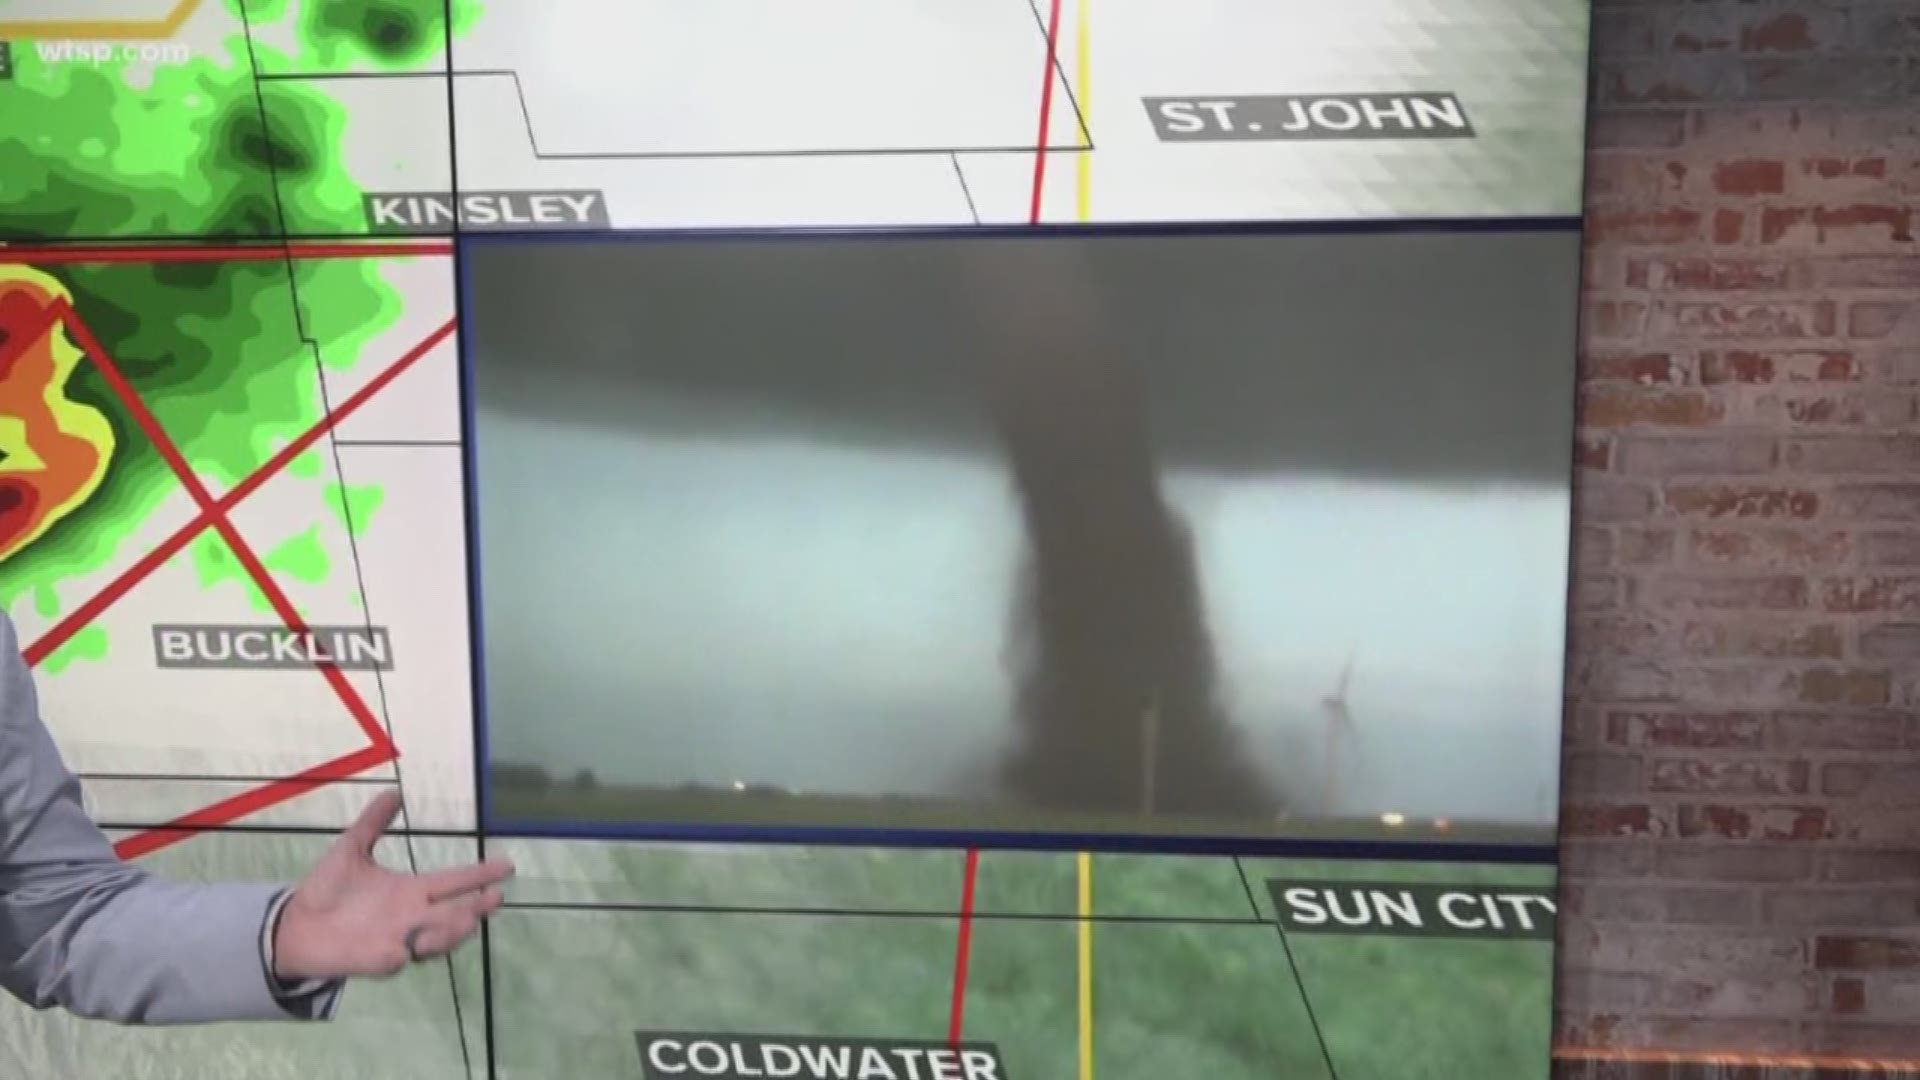 Images of a tornado went live around the world on the internet as storm chaser followed the storm as it unleashed destruction across miles of prairie.